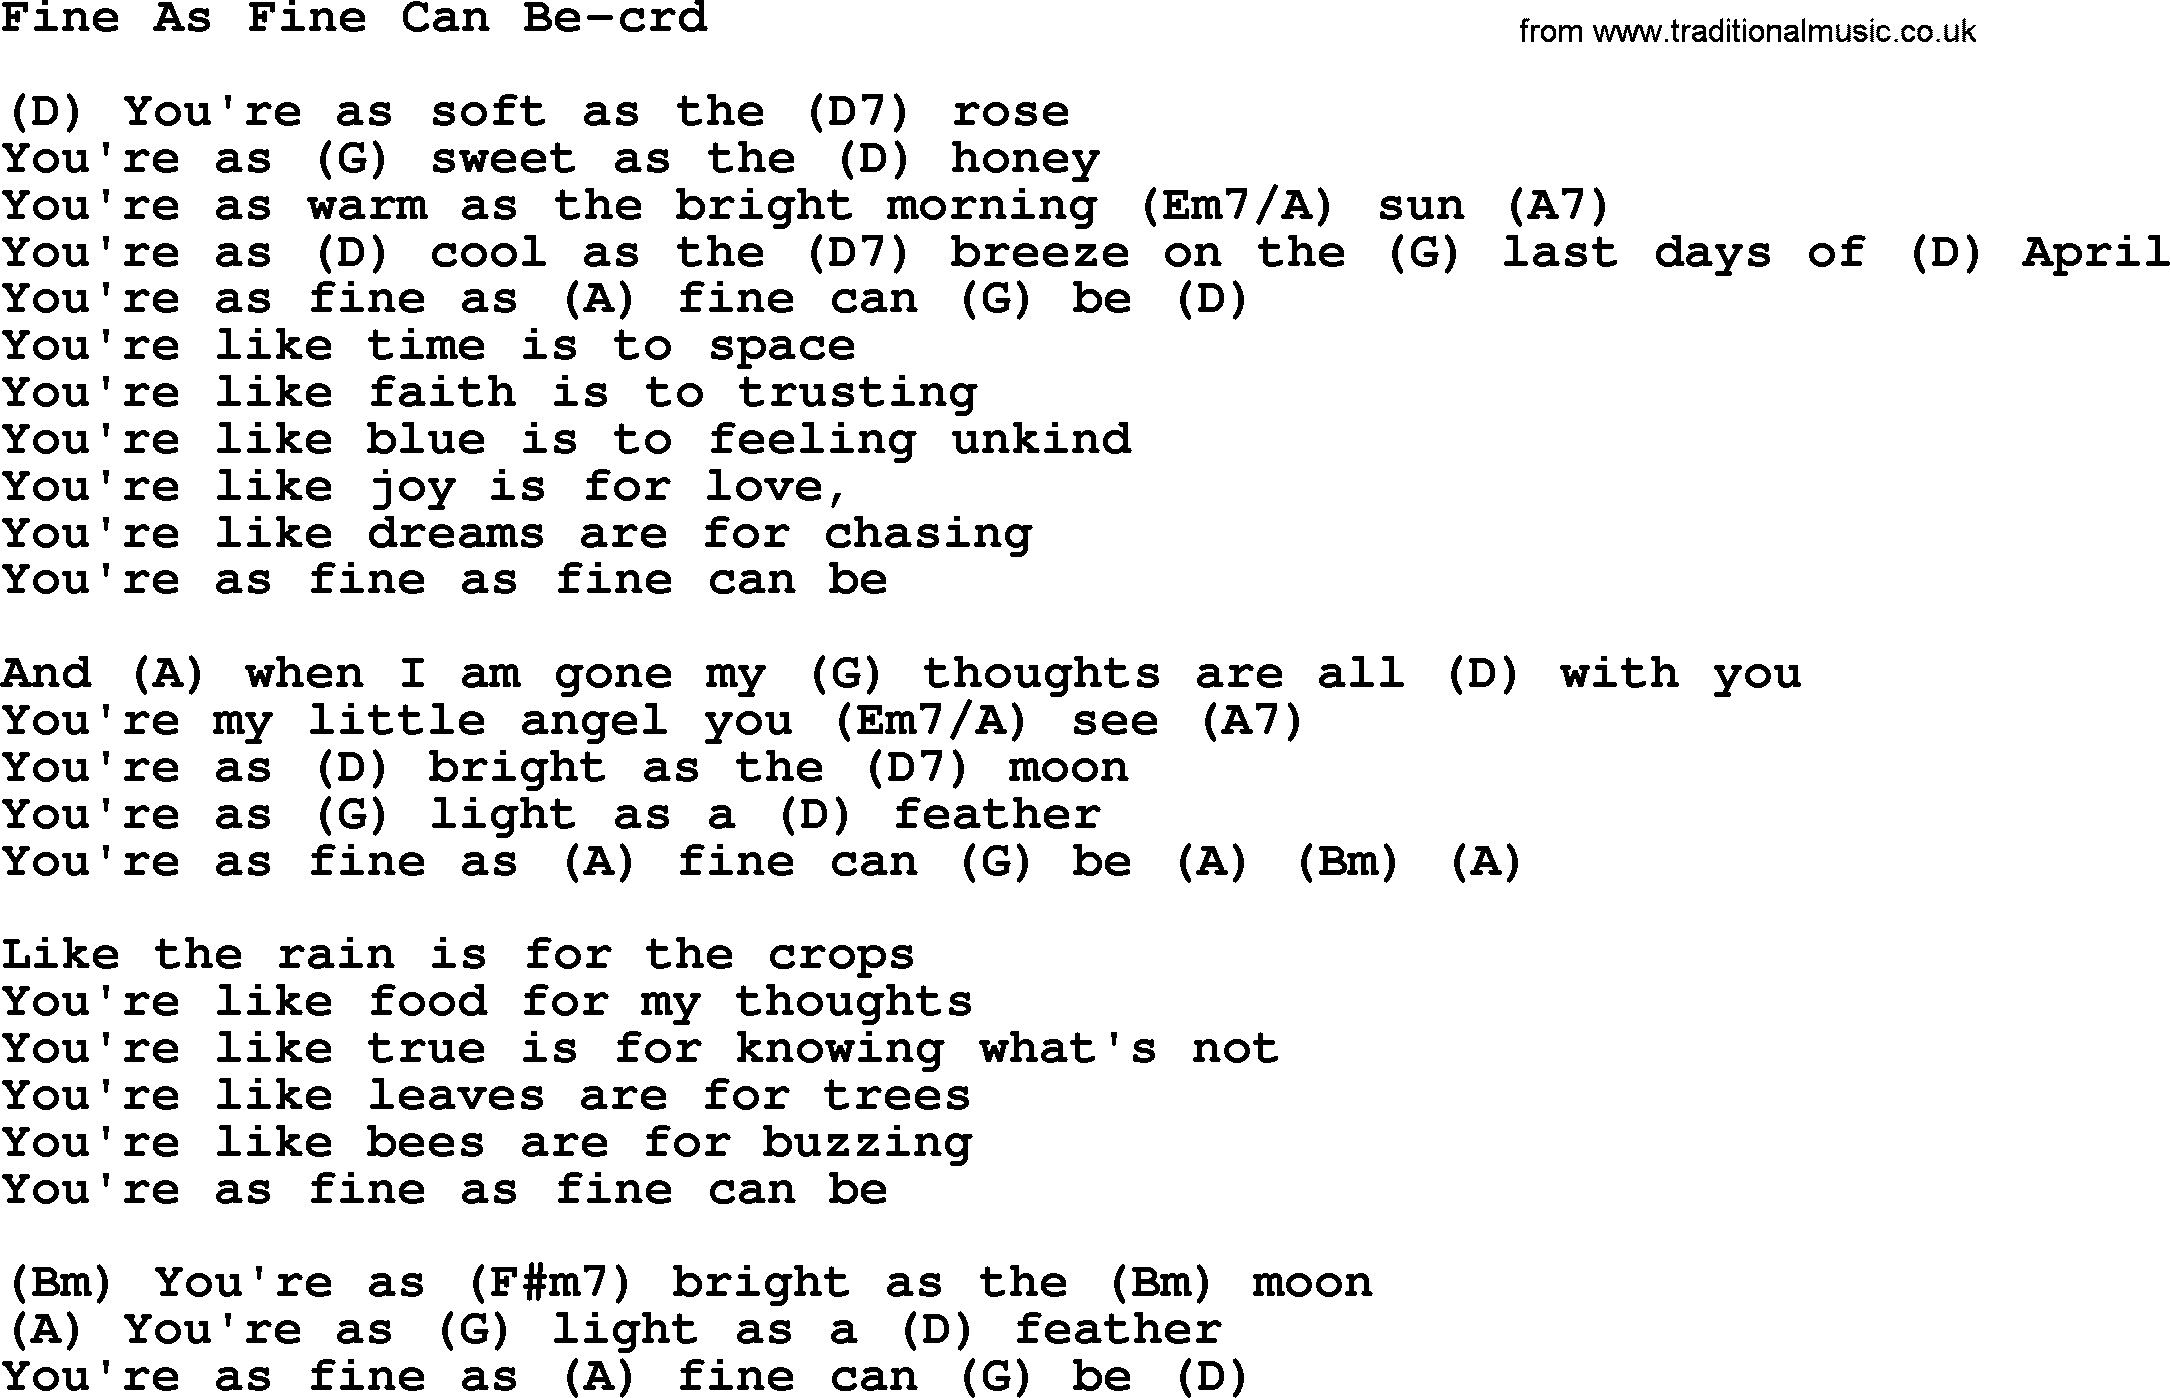 Gordon Lightfoot song Fine As Fine Can Be, lyrics and chords